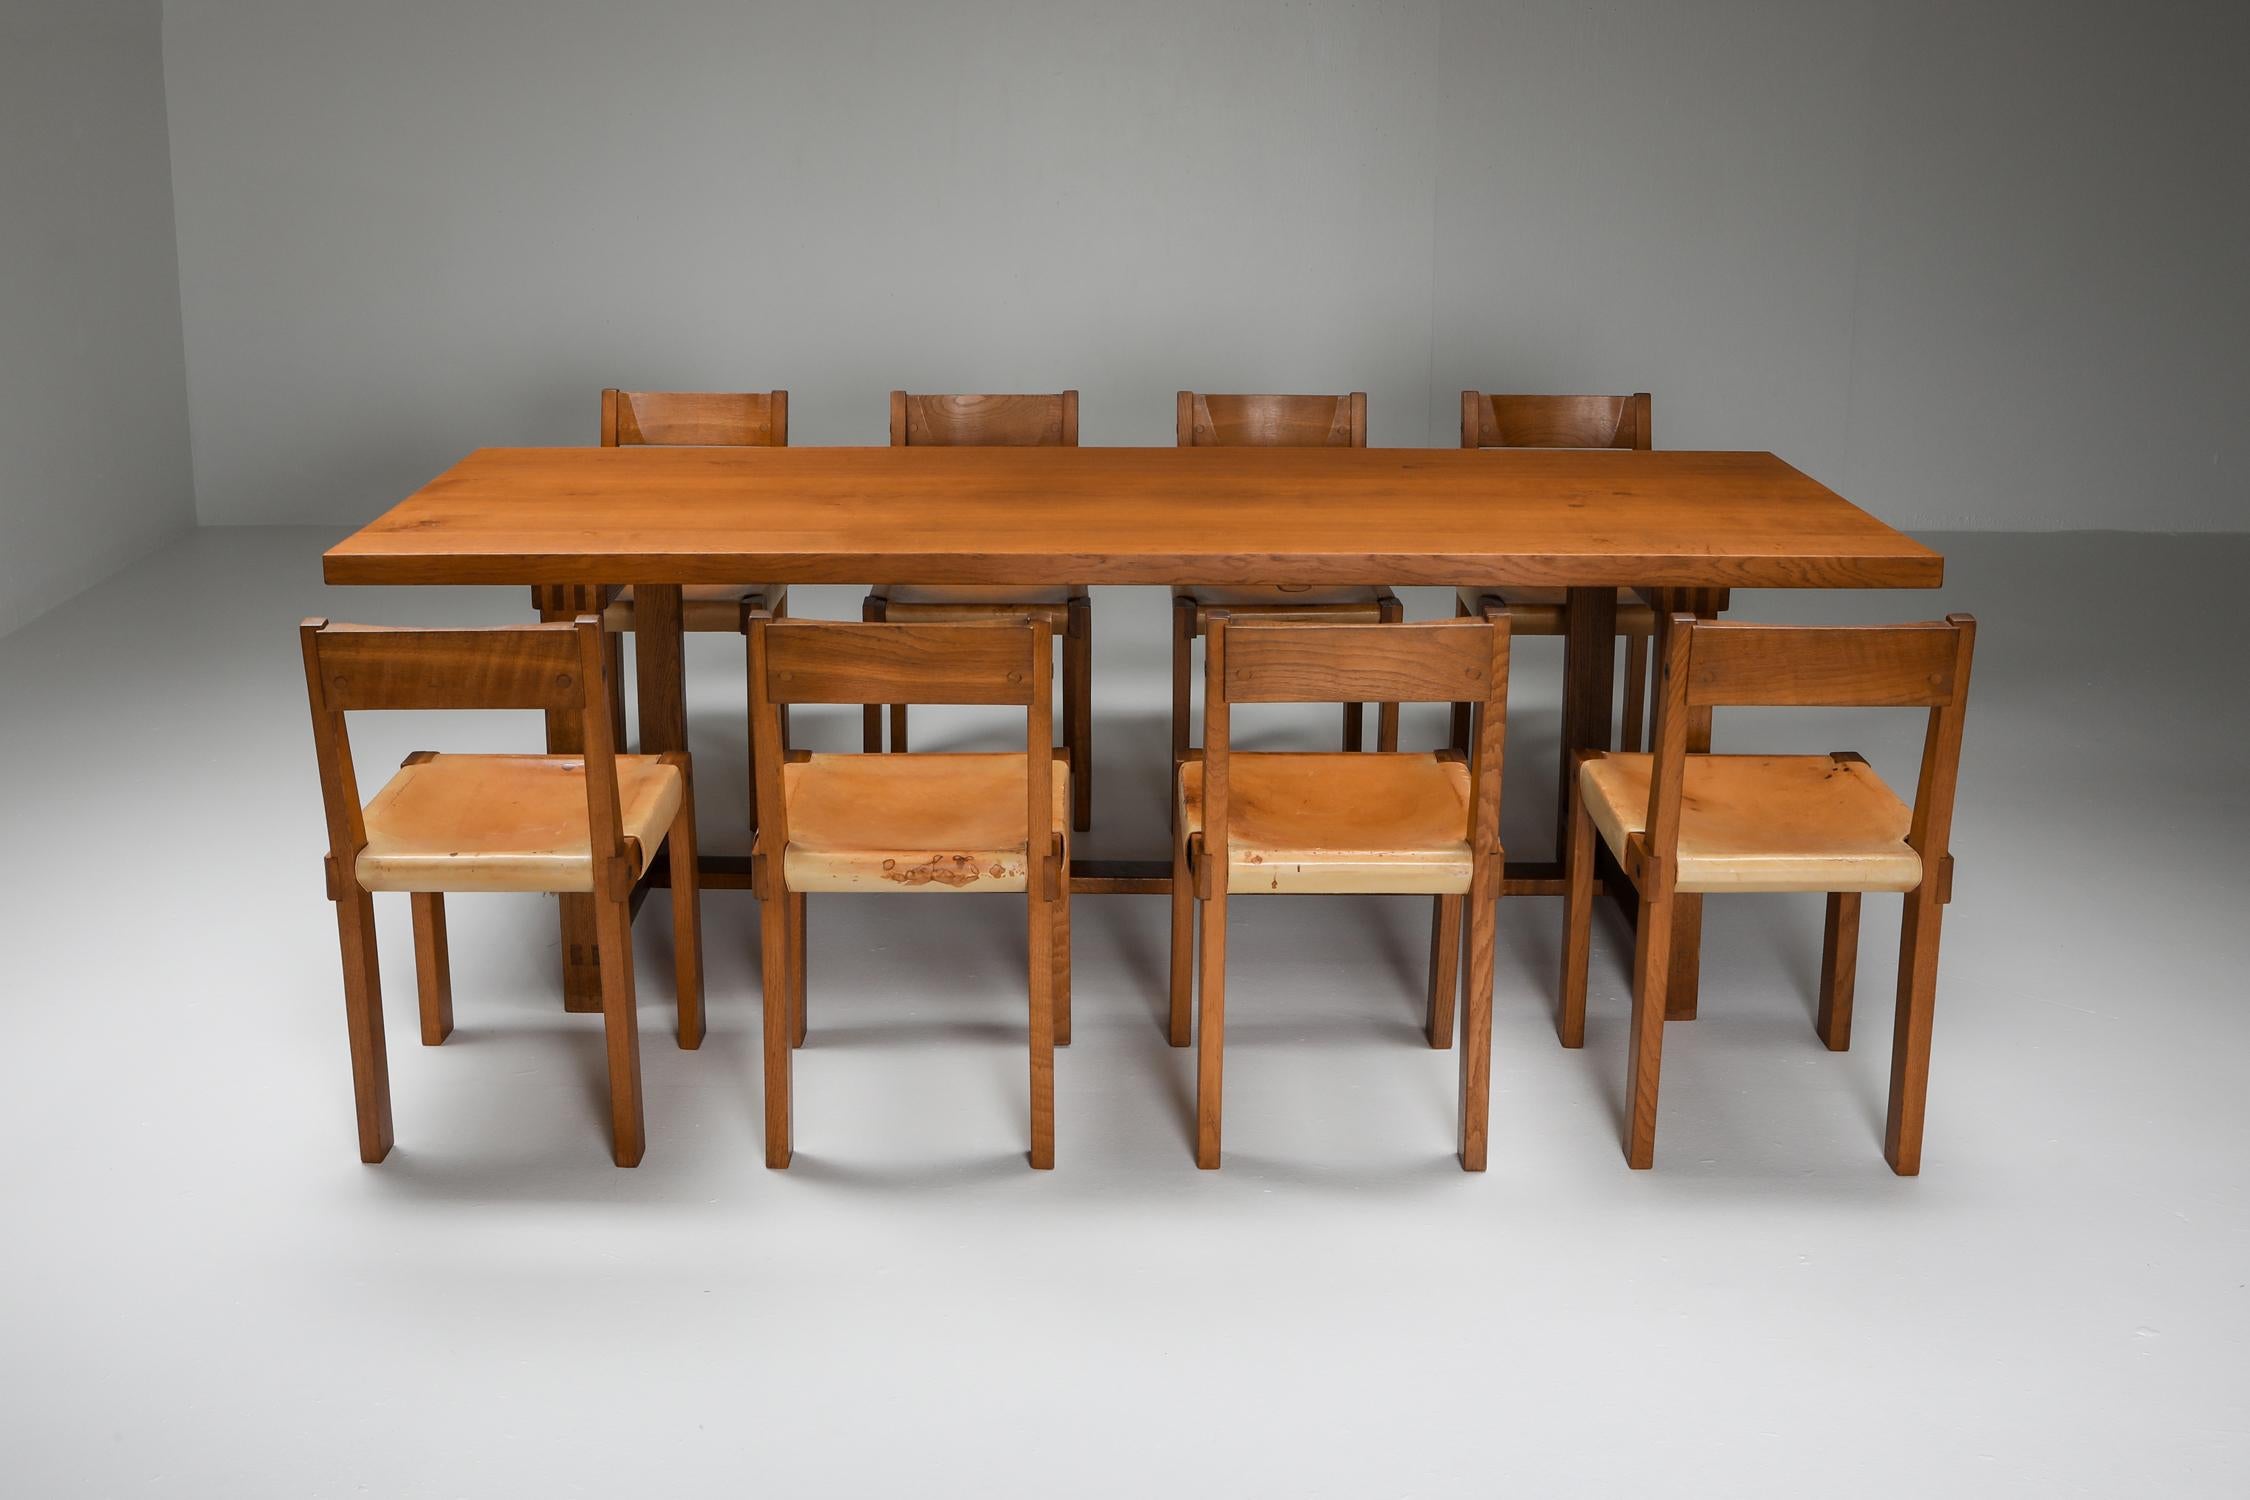 Pierre Chapo, solid elm dining table, T01D, S24 dining chairs, France, 1960s

Superb and rare rectangular dining table measuring 226 wide.
We've matched these with original S24 dining chairs in elm and natural tan leather

Pierre Chapo